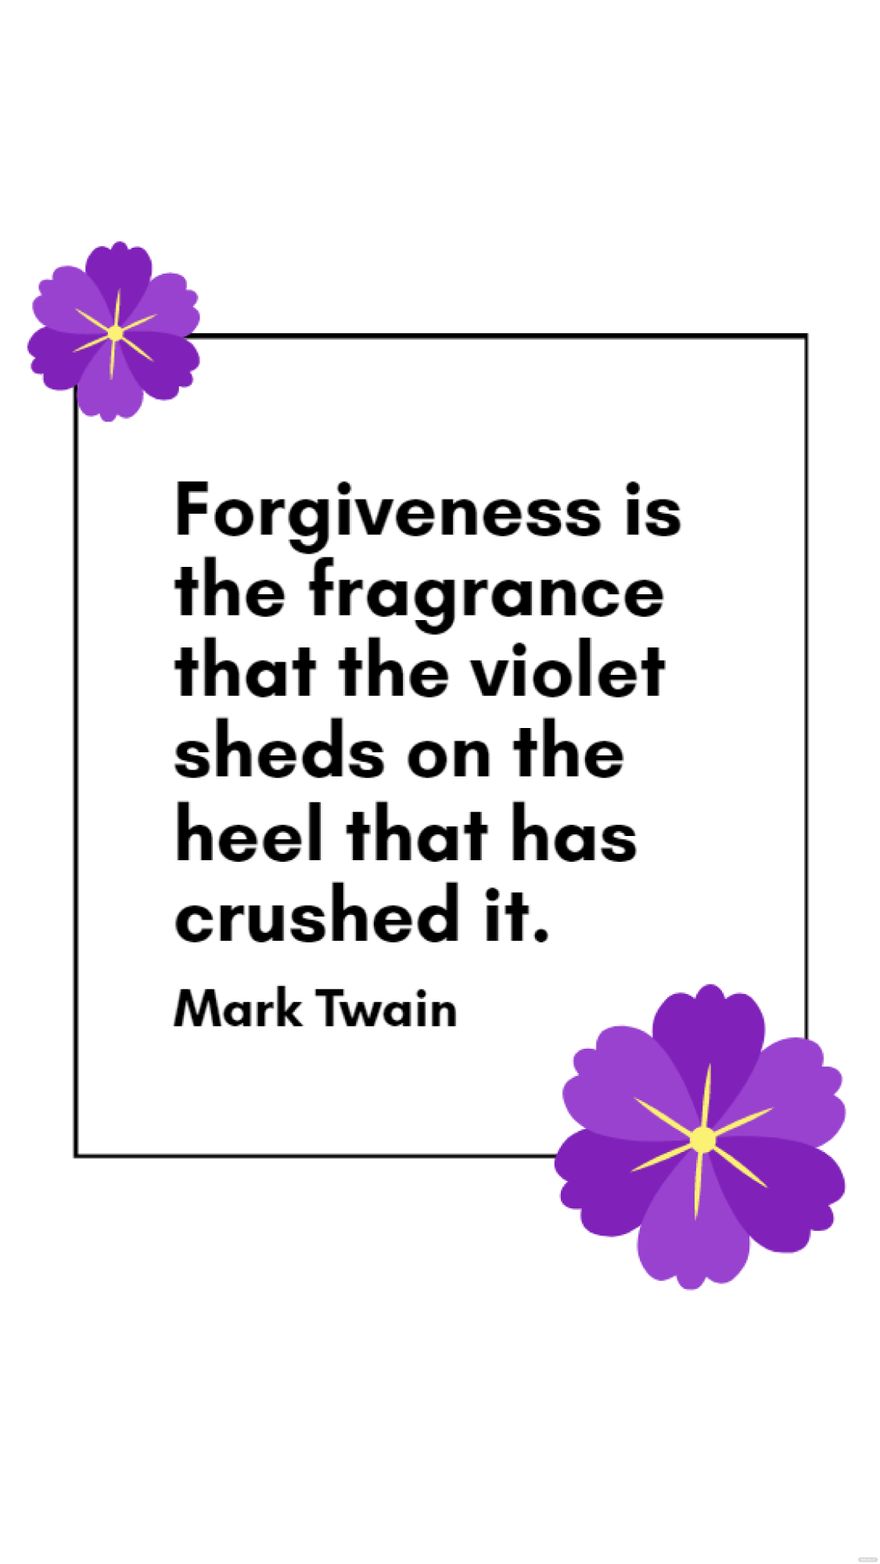 Free Mark Twain - Forgiveness is the fragrance that the violet sheds on the heel that has crushed it. in JPG